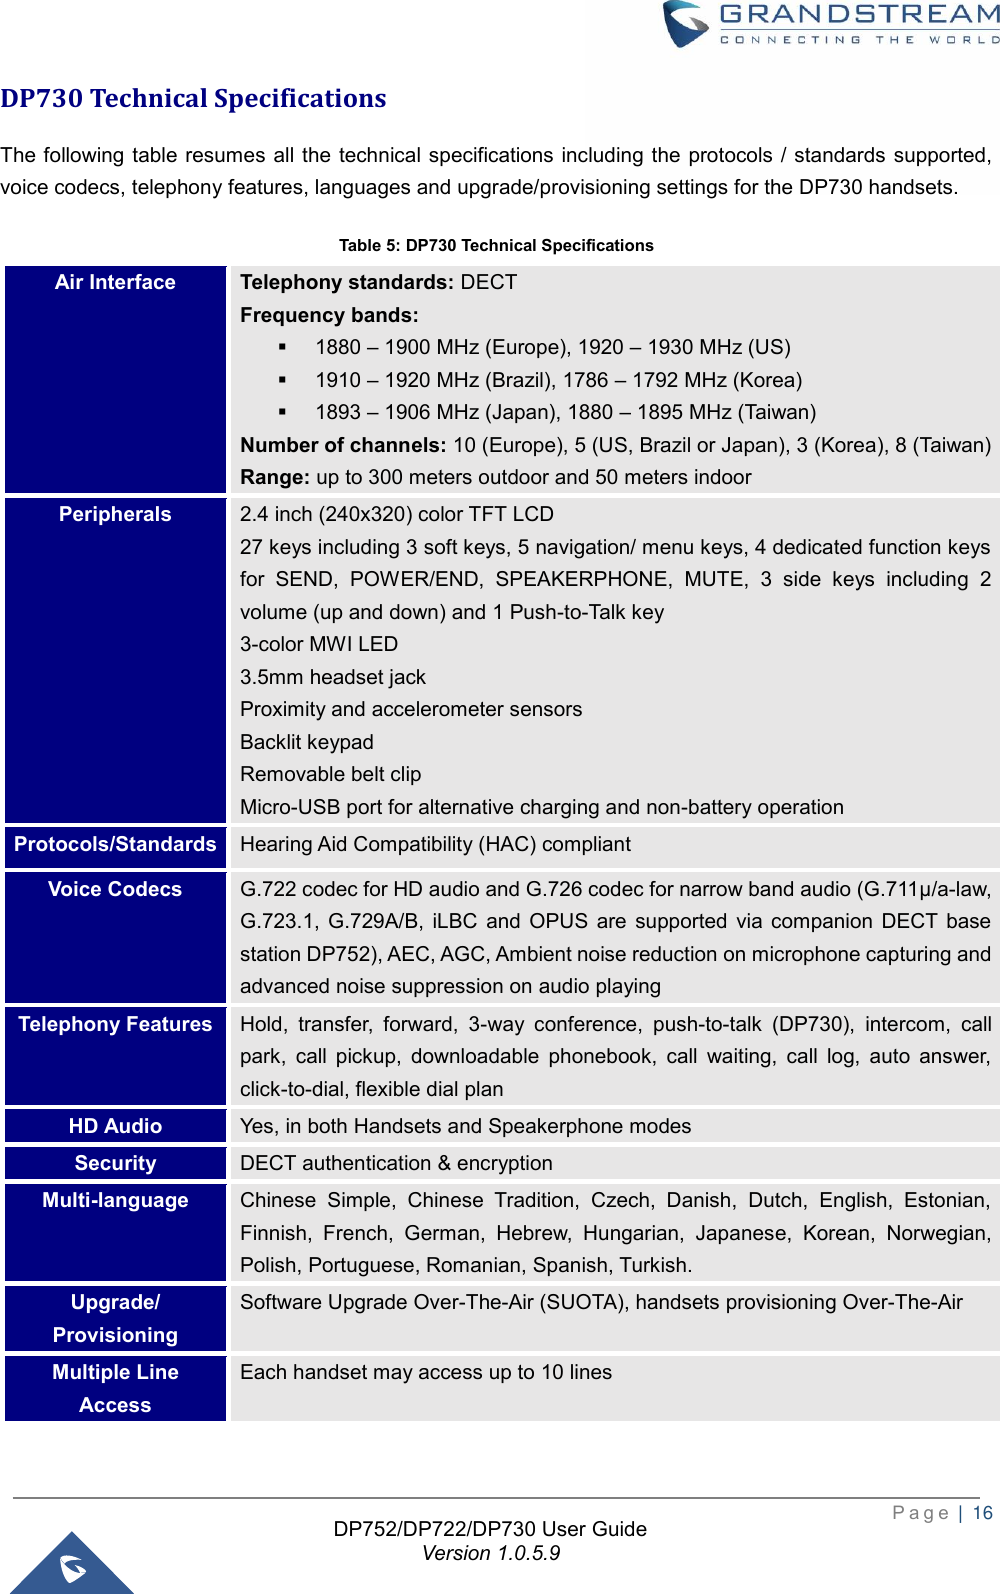  P a g e  |  16   DP752/DP722/DP730 User Guide Version 1.0.5.9   DP730 Technical Specifications The following table resumes  all the technical specifications including the protocols / standards  supported, voice codecs, telephony features, languages and upgrade/provisioning settings for the DP730 handsets. Table 5: DP730 Technical Specifications Air Interface Telephony standards: DECT Frequency bands: ▪ 1880 – 1900 MHz (Europe), 1920 – 1930 MHz (US) ▪ 1910 – 1920 MHz (Brazil), 1786 – 1792 MHz (Korea) ▪ 1893 – 1906 MHz (Japan), 1880 – 1895 MHz (Taiwan) Number of channels: 10 (Europe), 5 (US, Brazil or Japan), 3 (Korea), 8 (Taiwan) Range: up to 300 meters outdoor and 50 meters indoor Peripherals 2.4 inch (240x320) color TFT LCD 27 keys including 3 soft keys, 5 navigation/ menu keys, 4 dedicated function keys for  SEND,  POWER/END,  SPEAKERPHONE,  MUTE,  3  side  keys  including  2 volume (up and down) and 1 Push-to-Talk key   3-color MWI LED 3.5mm headset jack Proximity and accelerometer sensors Backlit keypad Removable belt clip Micro-USB port for alternative charging and non-battery operation Protocols/Standards Hearing Aid Compatibility (HAC) compliant Voice Codecs G.722 codec for HD audio and G.726 codec for narrow band audio (G.711μ/a-law, G.723.1,  G.729A/B,  iLBC  and  OPUS  are  supported  via  companion  DECT base station DP752), AEC, AGC, Ambient noise reduction on microphone capturing and advanced noise suppression on audio playing Telephony Features Hold,  transfer,  forward,  3-way  conference,  push-to-talk  (DP730),  intercom,  call park,  call  pickup,  downloadable  phonebook,  call  waiting,  call  log,  auto  answer, click-to-dial, flexible dial plan HD Audio Yes, in both Handsets and Speakerphone modes Security DECT authentication &amp; encryption Multi-language Chinese  Simple,  Chinese  Tradition,  Czech,  Danish,  Dutch,  English,  Estonian, Finnish,  French,  German,  Hebrew,  Hungarian,  Japanese,  Korean,  Norwegian, Polish, Portuguese, Romanian, Spanish, Turkish. Upgrade/ Provisioning Software Upgrade Over-The-Air (SUOTA), handsets provisioning Over-The-Air Multiple Line Access Each handset may access up to 10 lines 